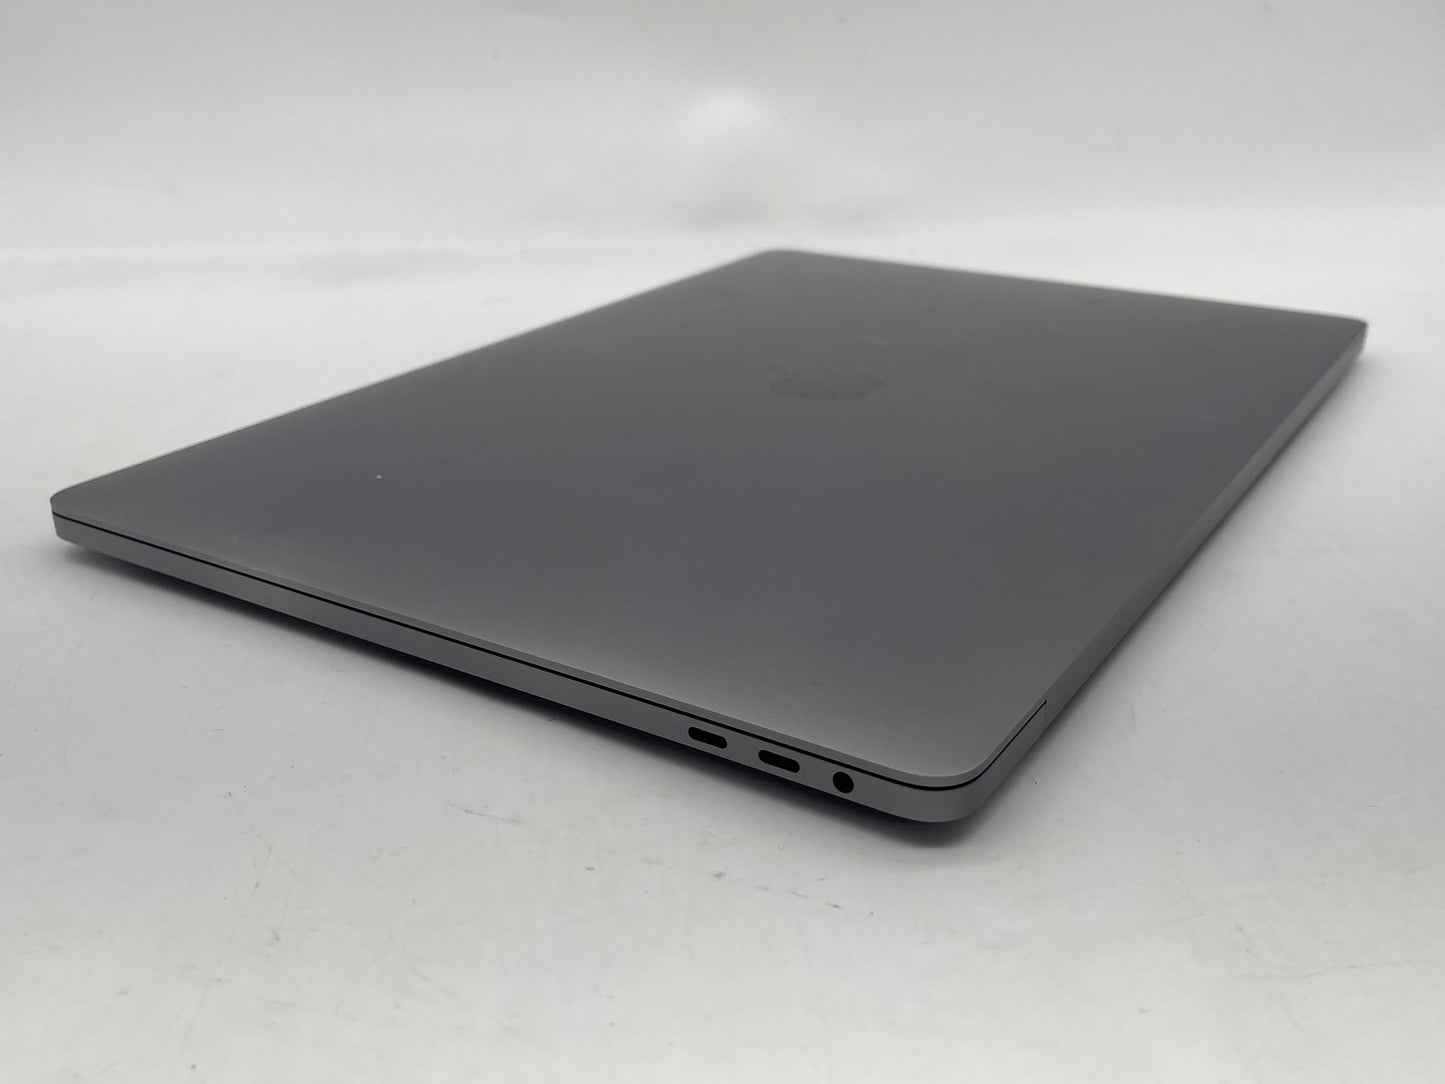 Apple 2019 MacBook Pro 16 in 2.4GHz i9 32GB RAM 2TB SSD RP5500M 4GB - Excellent